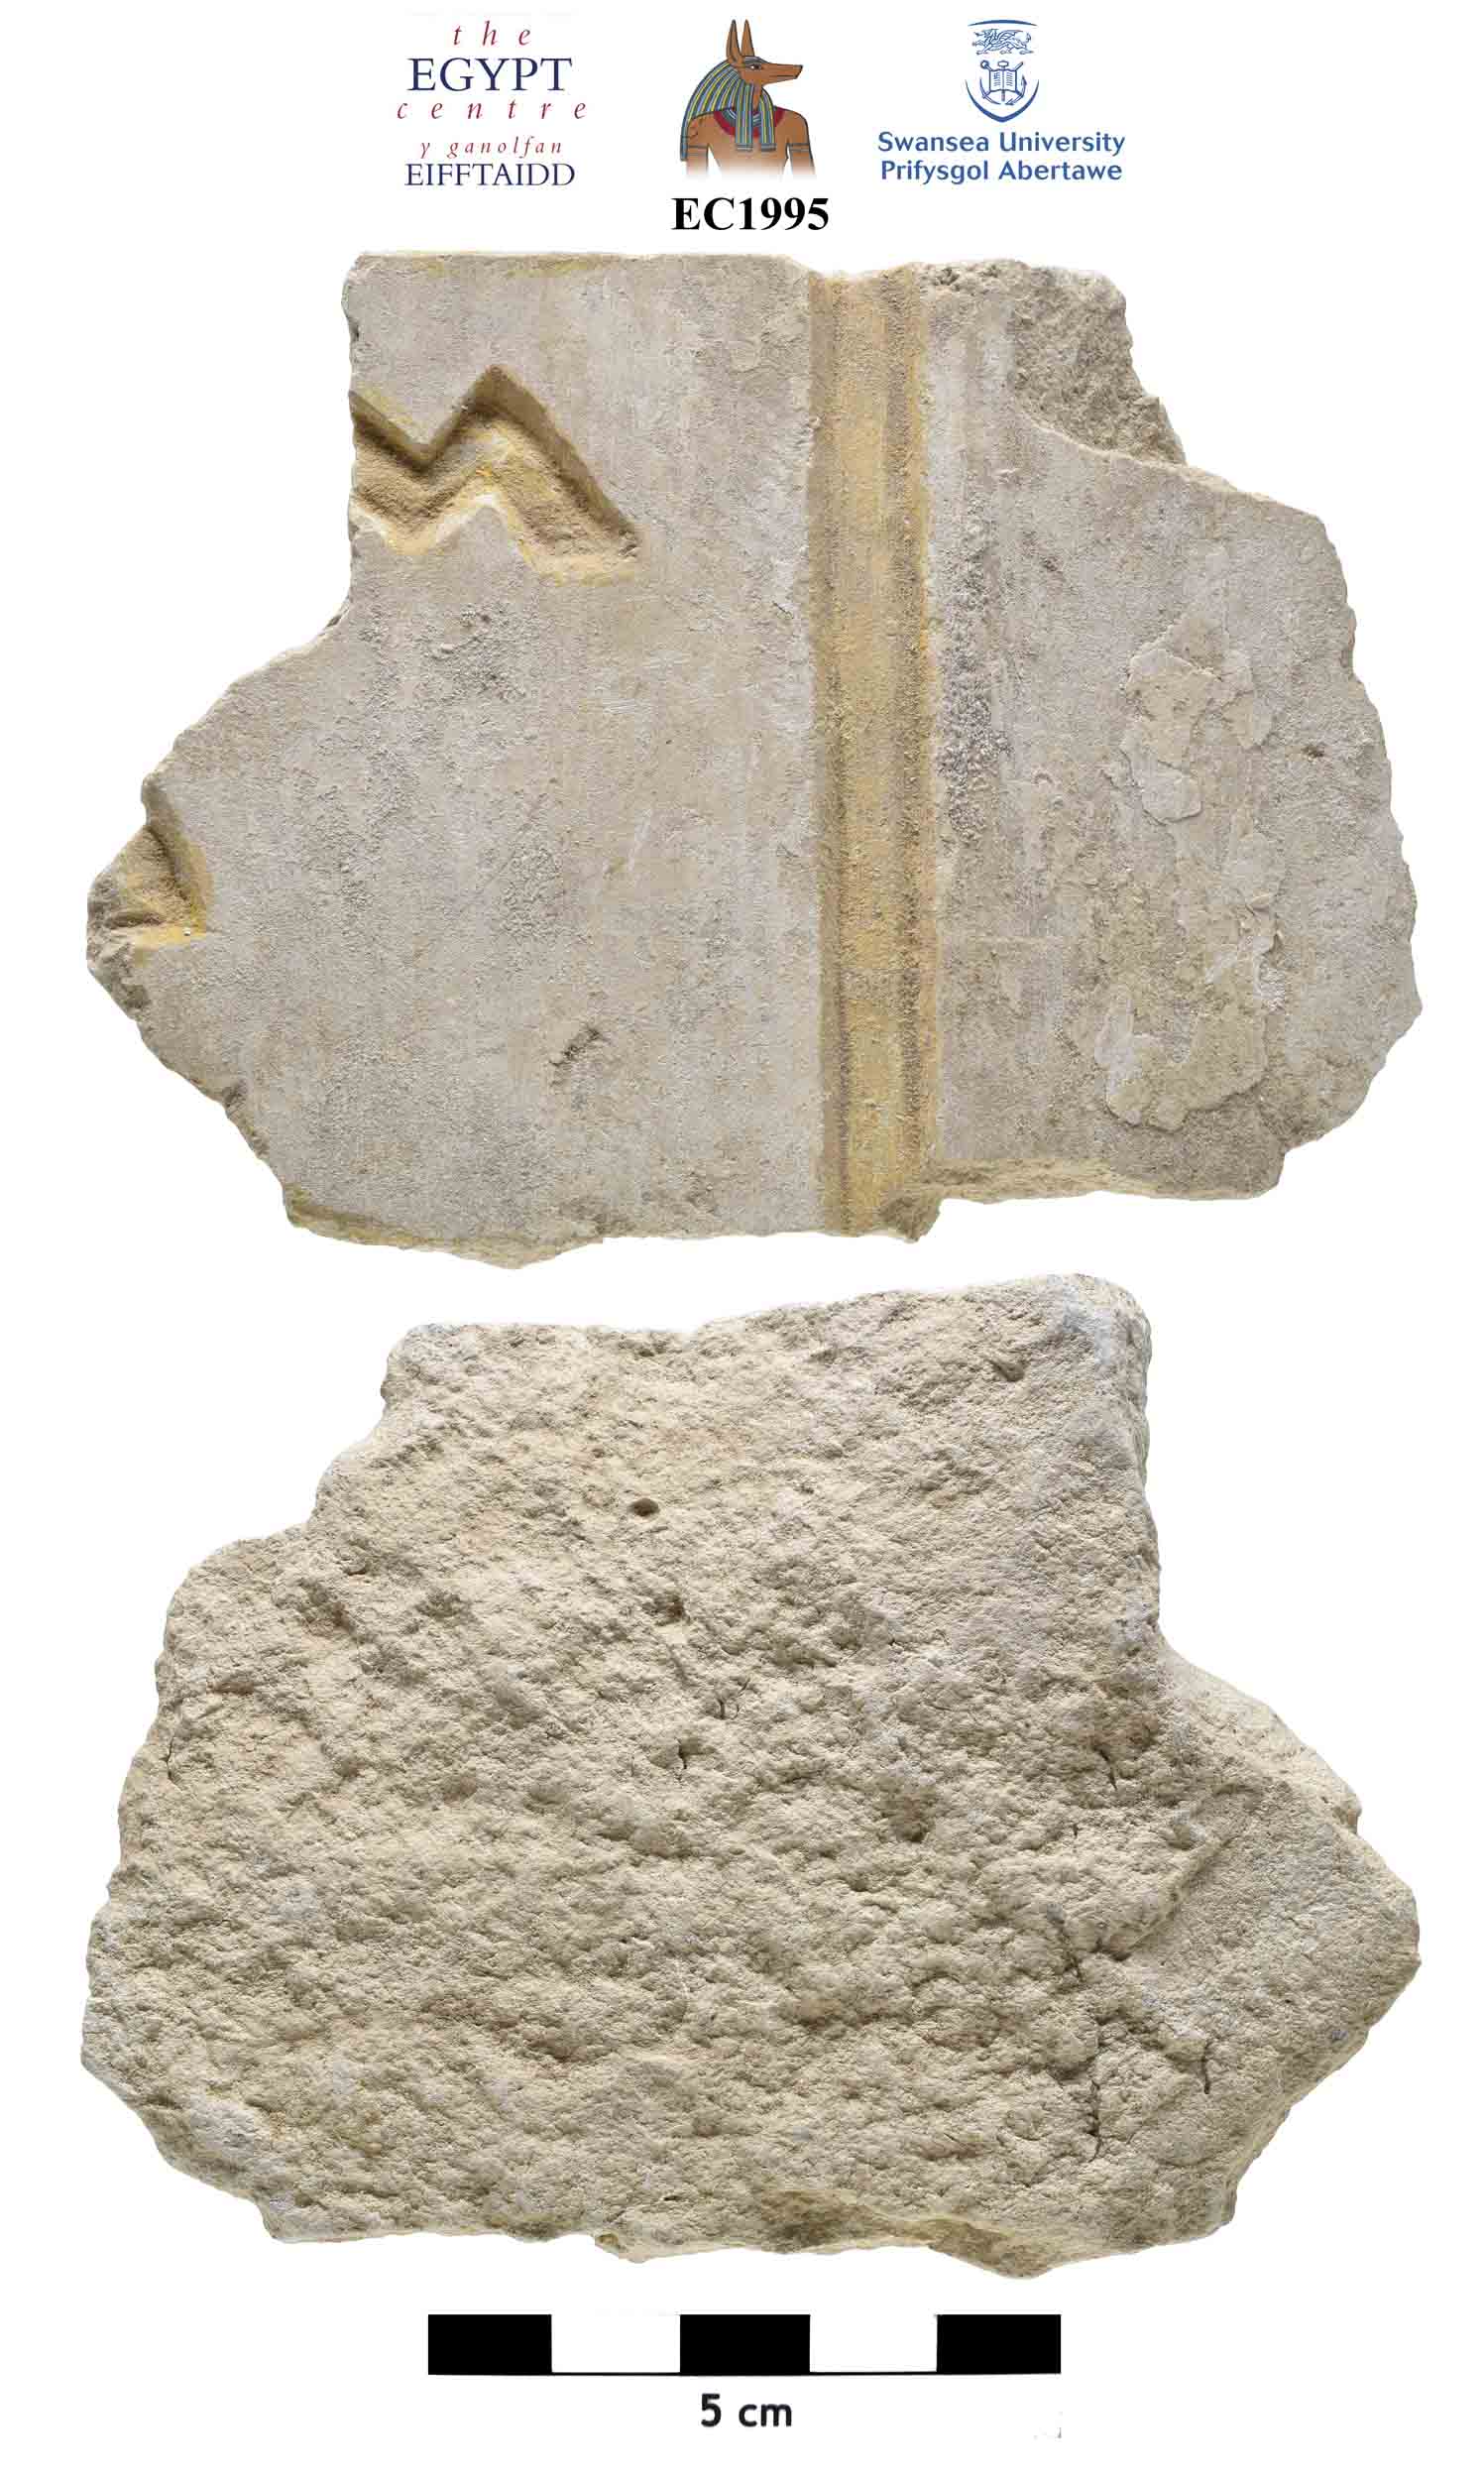 Image for: Relief fragment